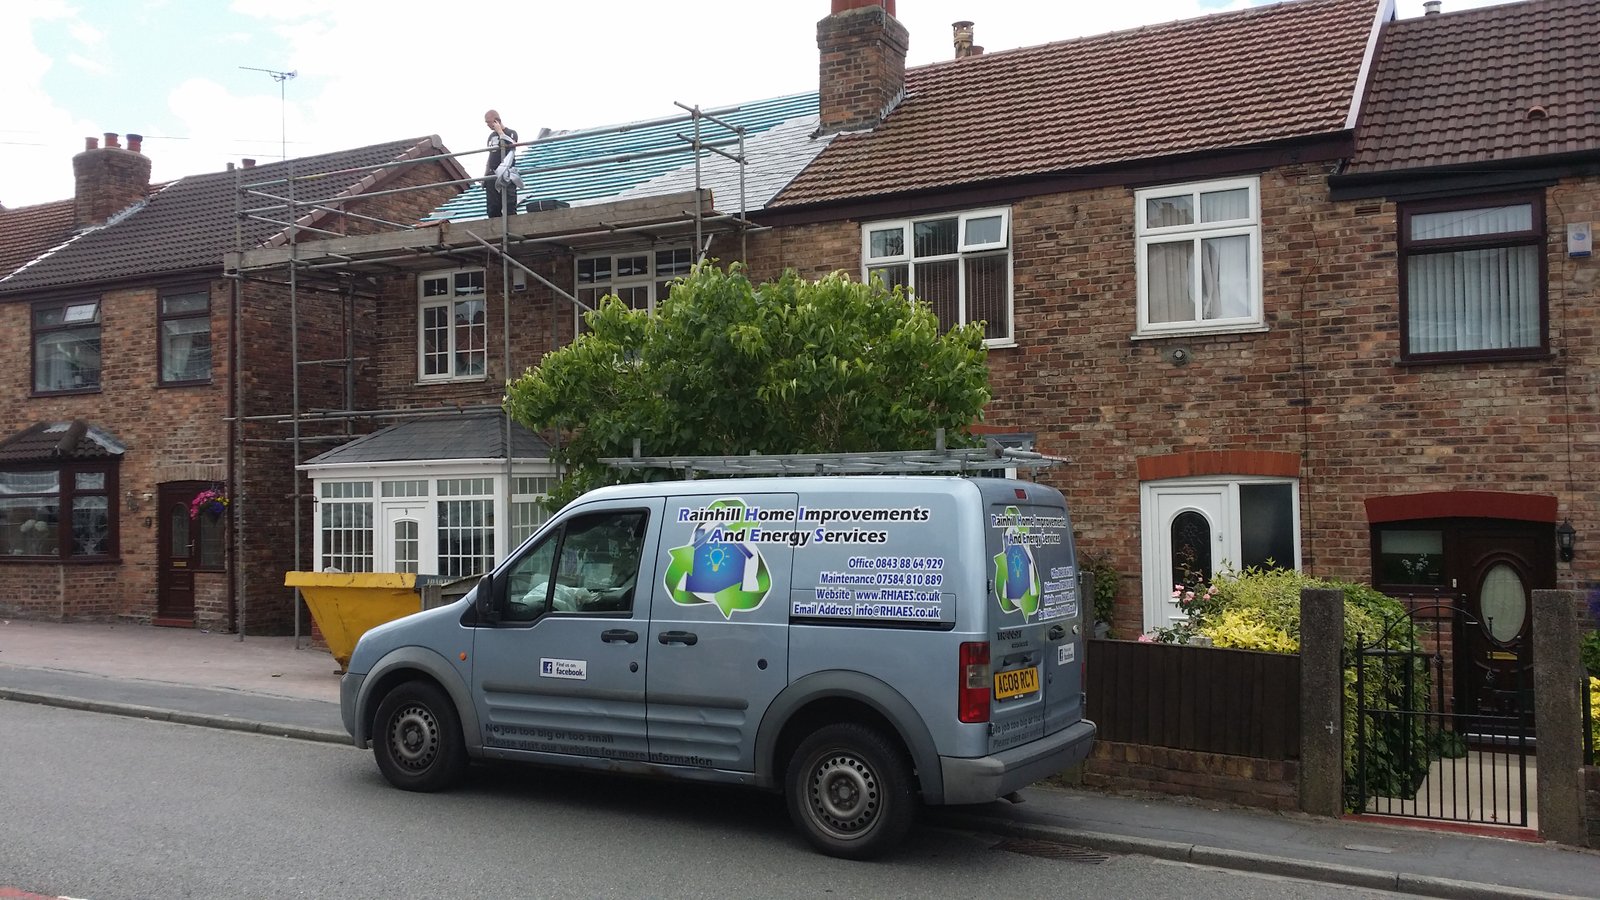 Rainhill Home Improvements and Energy Services also do residential property maintenance